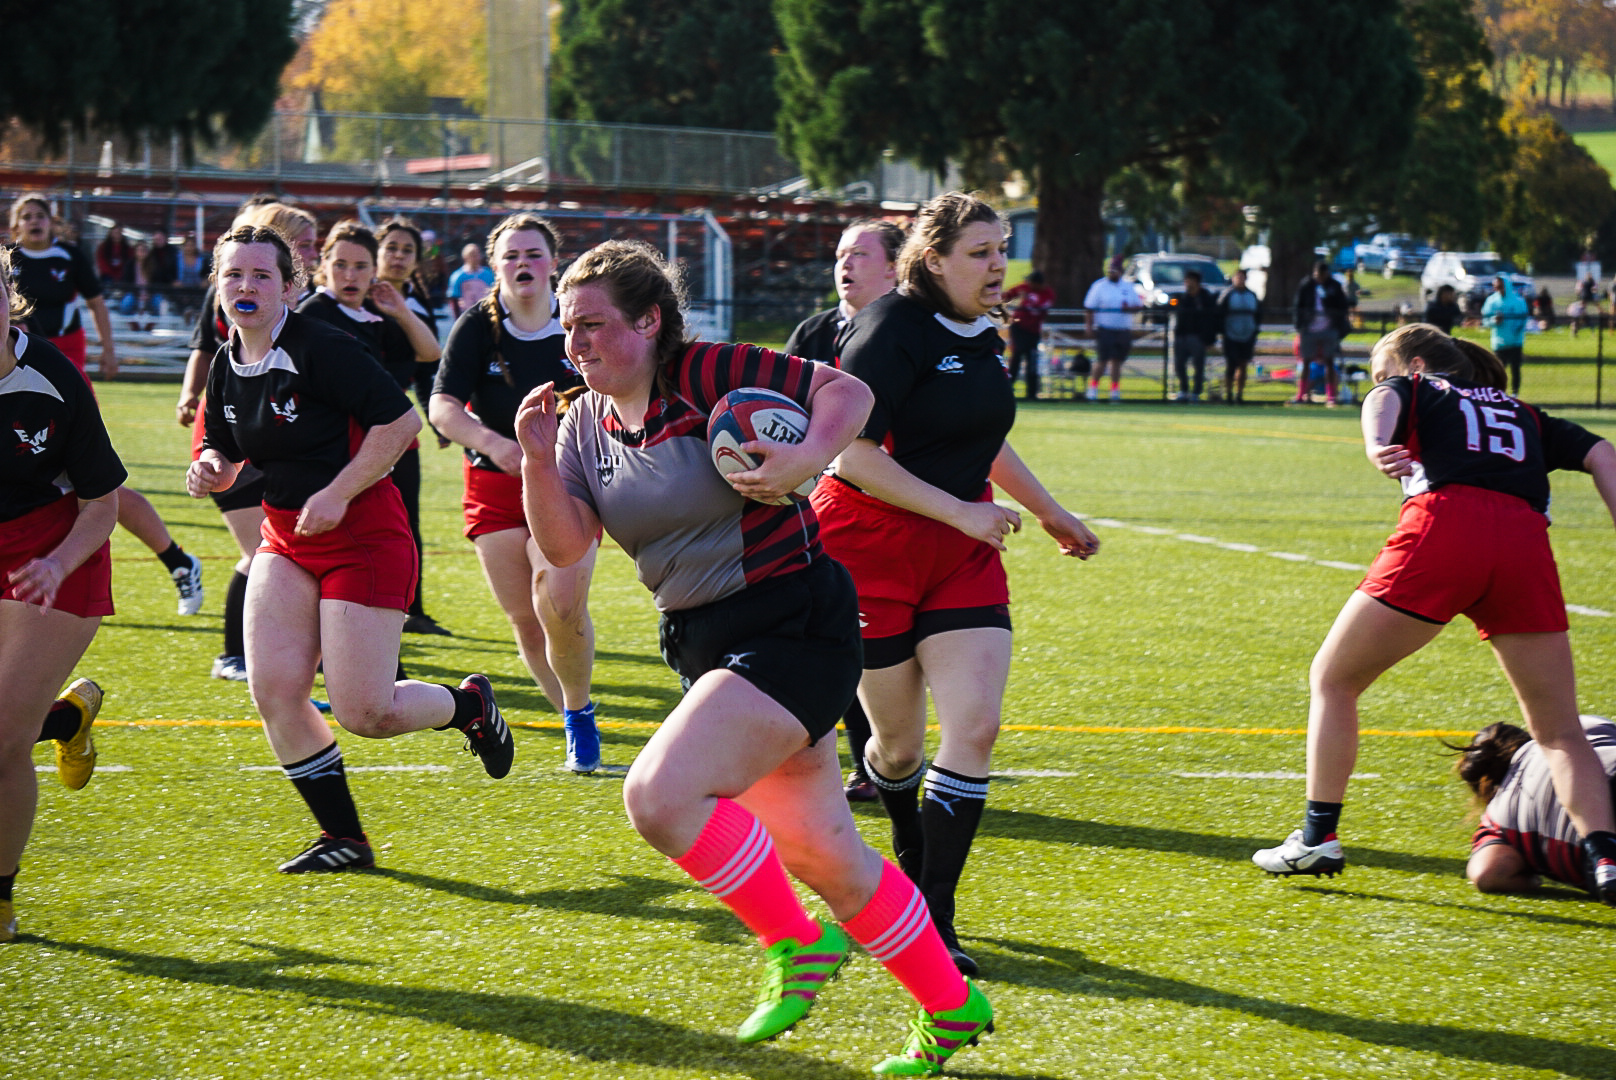 Pedal to the metal, the Wolves shutout the Banshees in home opener of Women’s Rugby